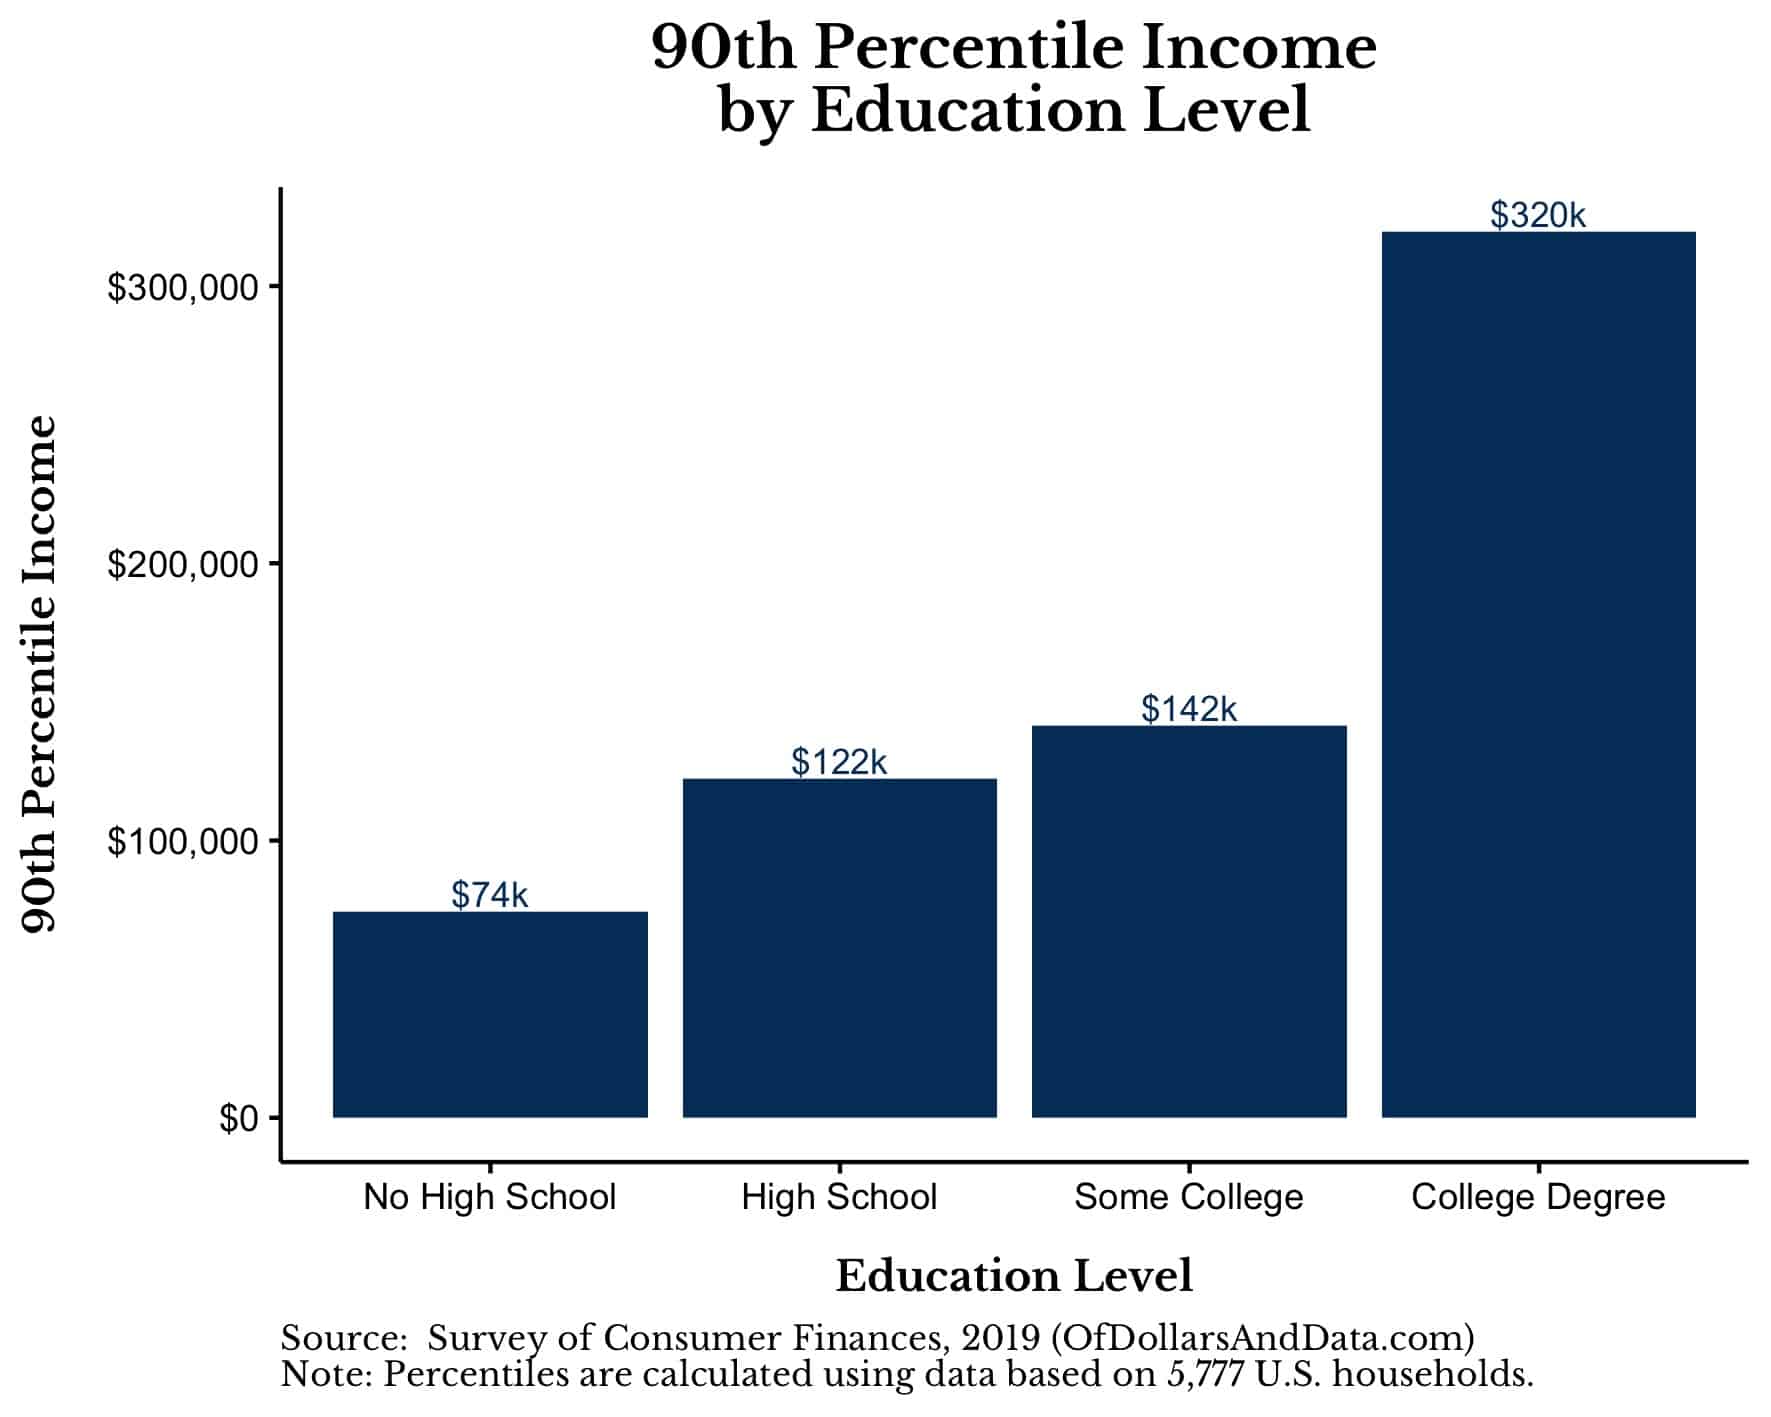 90th percentile household income by education level.